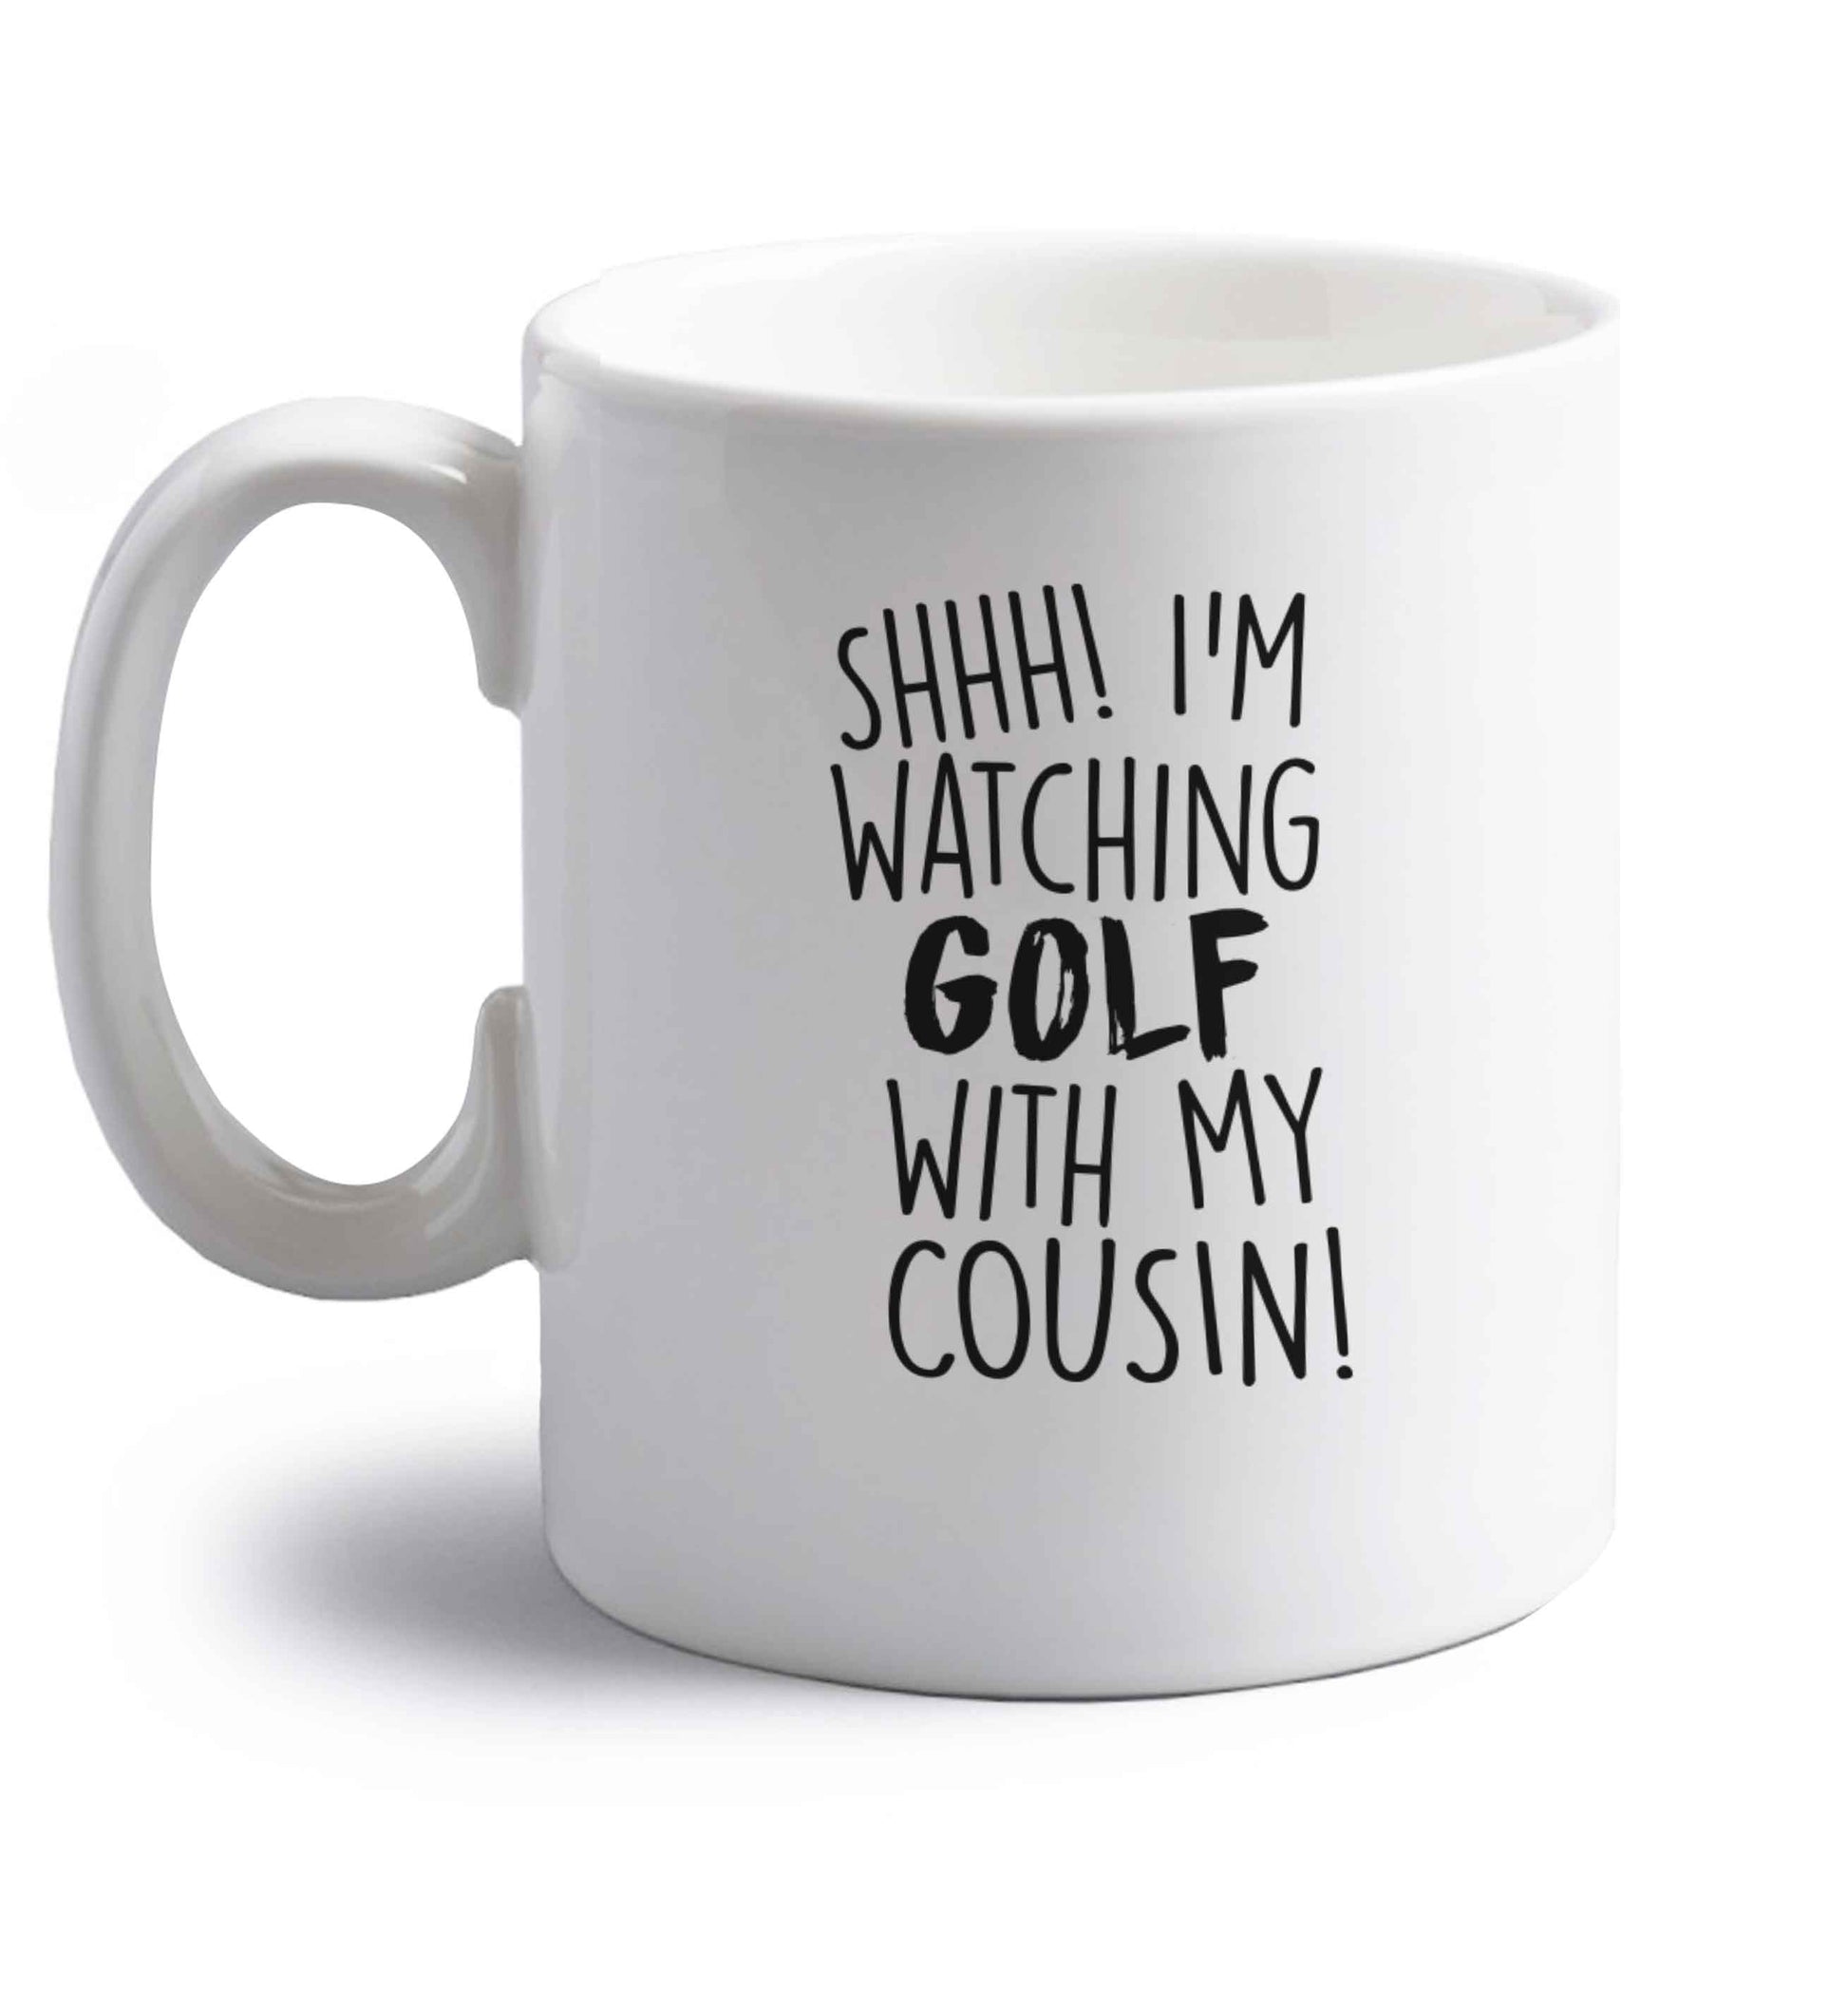 Shh I'm watching golf with my cousin right handed white ceramic mug 